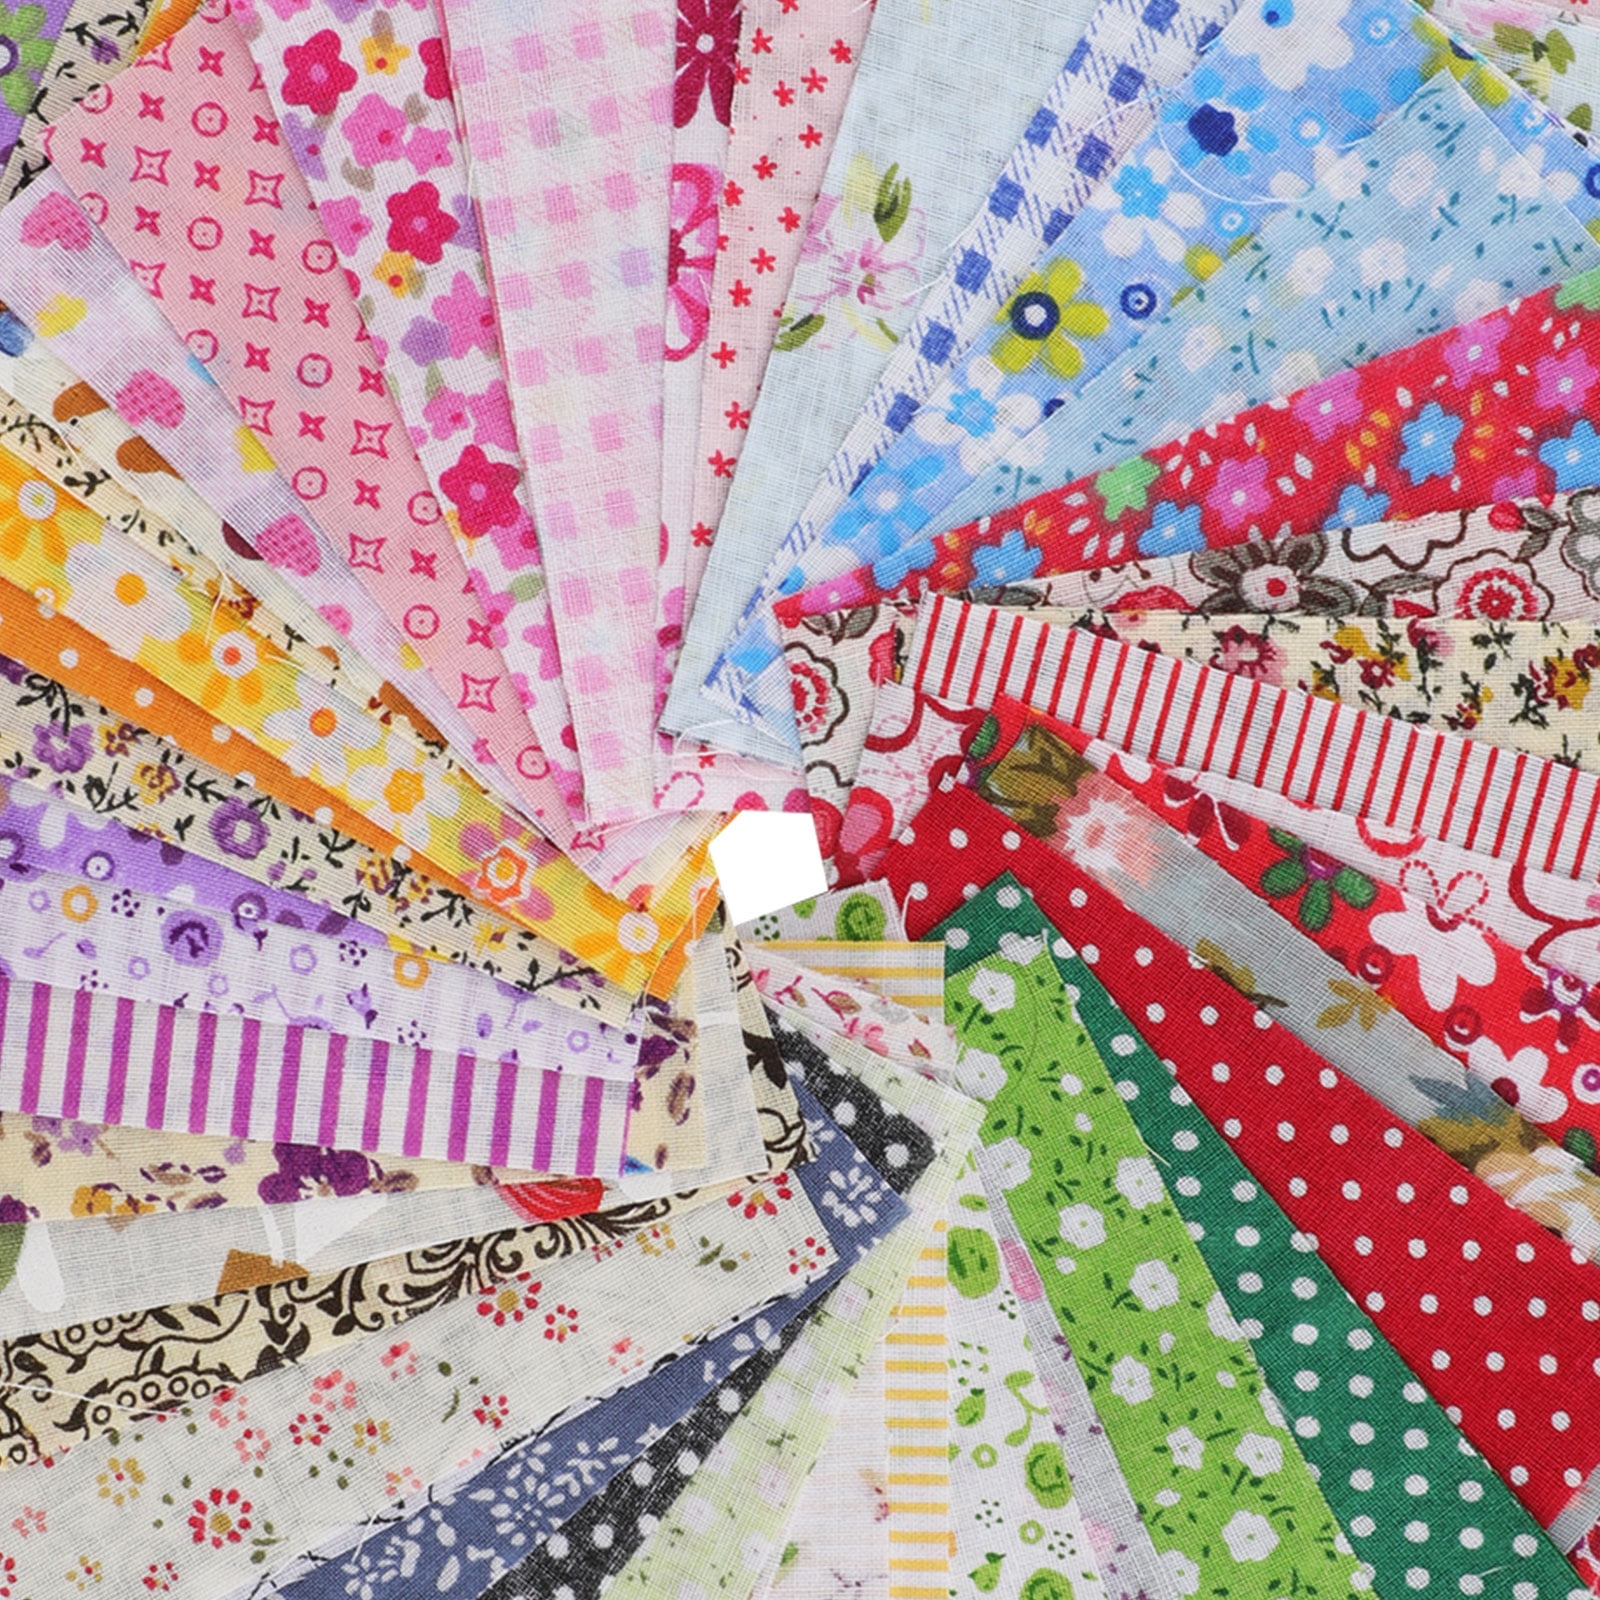 Fabric Weights: Tin: Daisy: Pack of 4 - Sew Easy - Groves and Banks